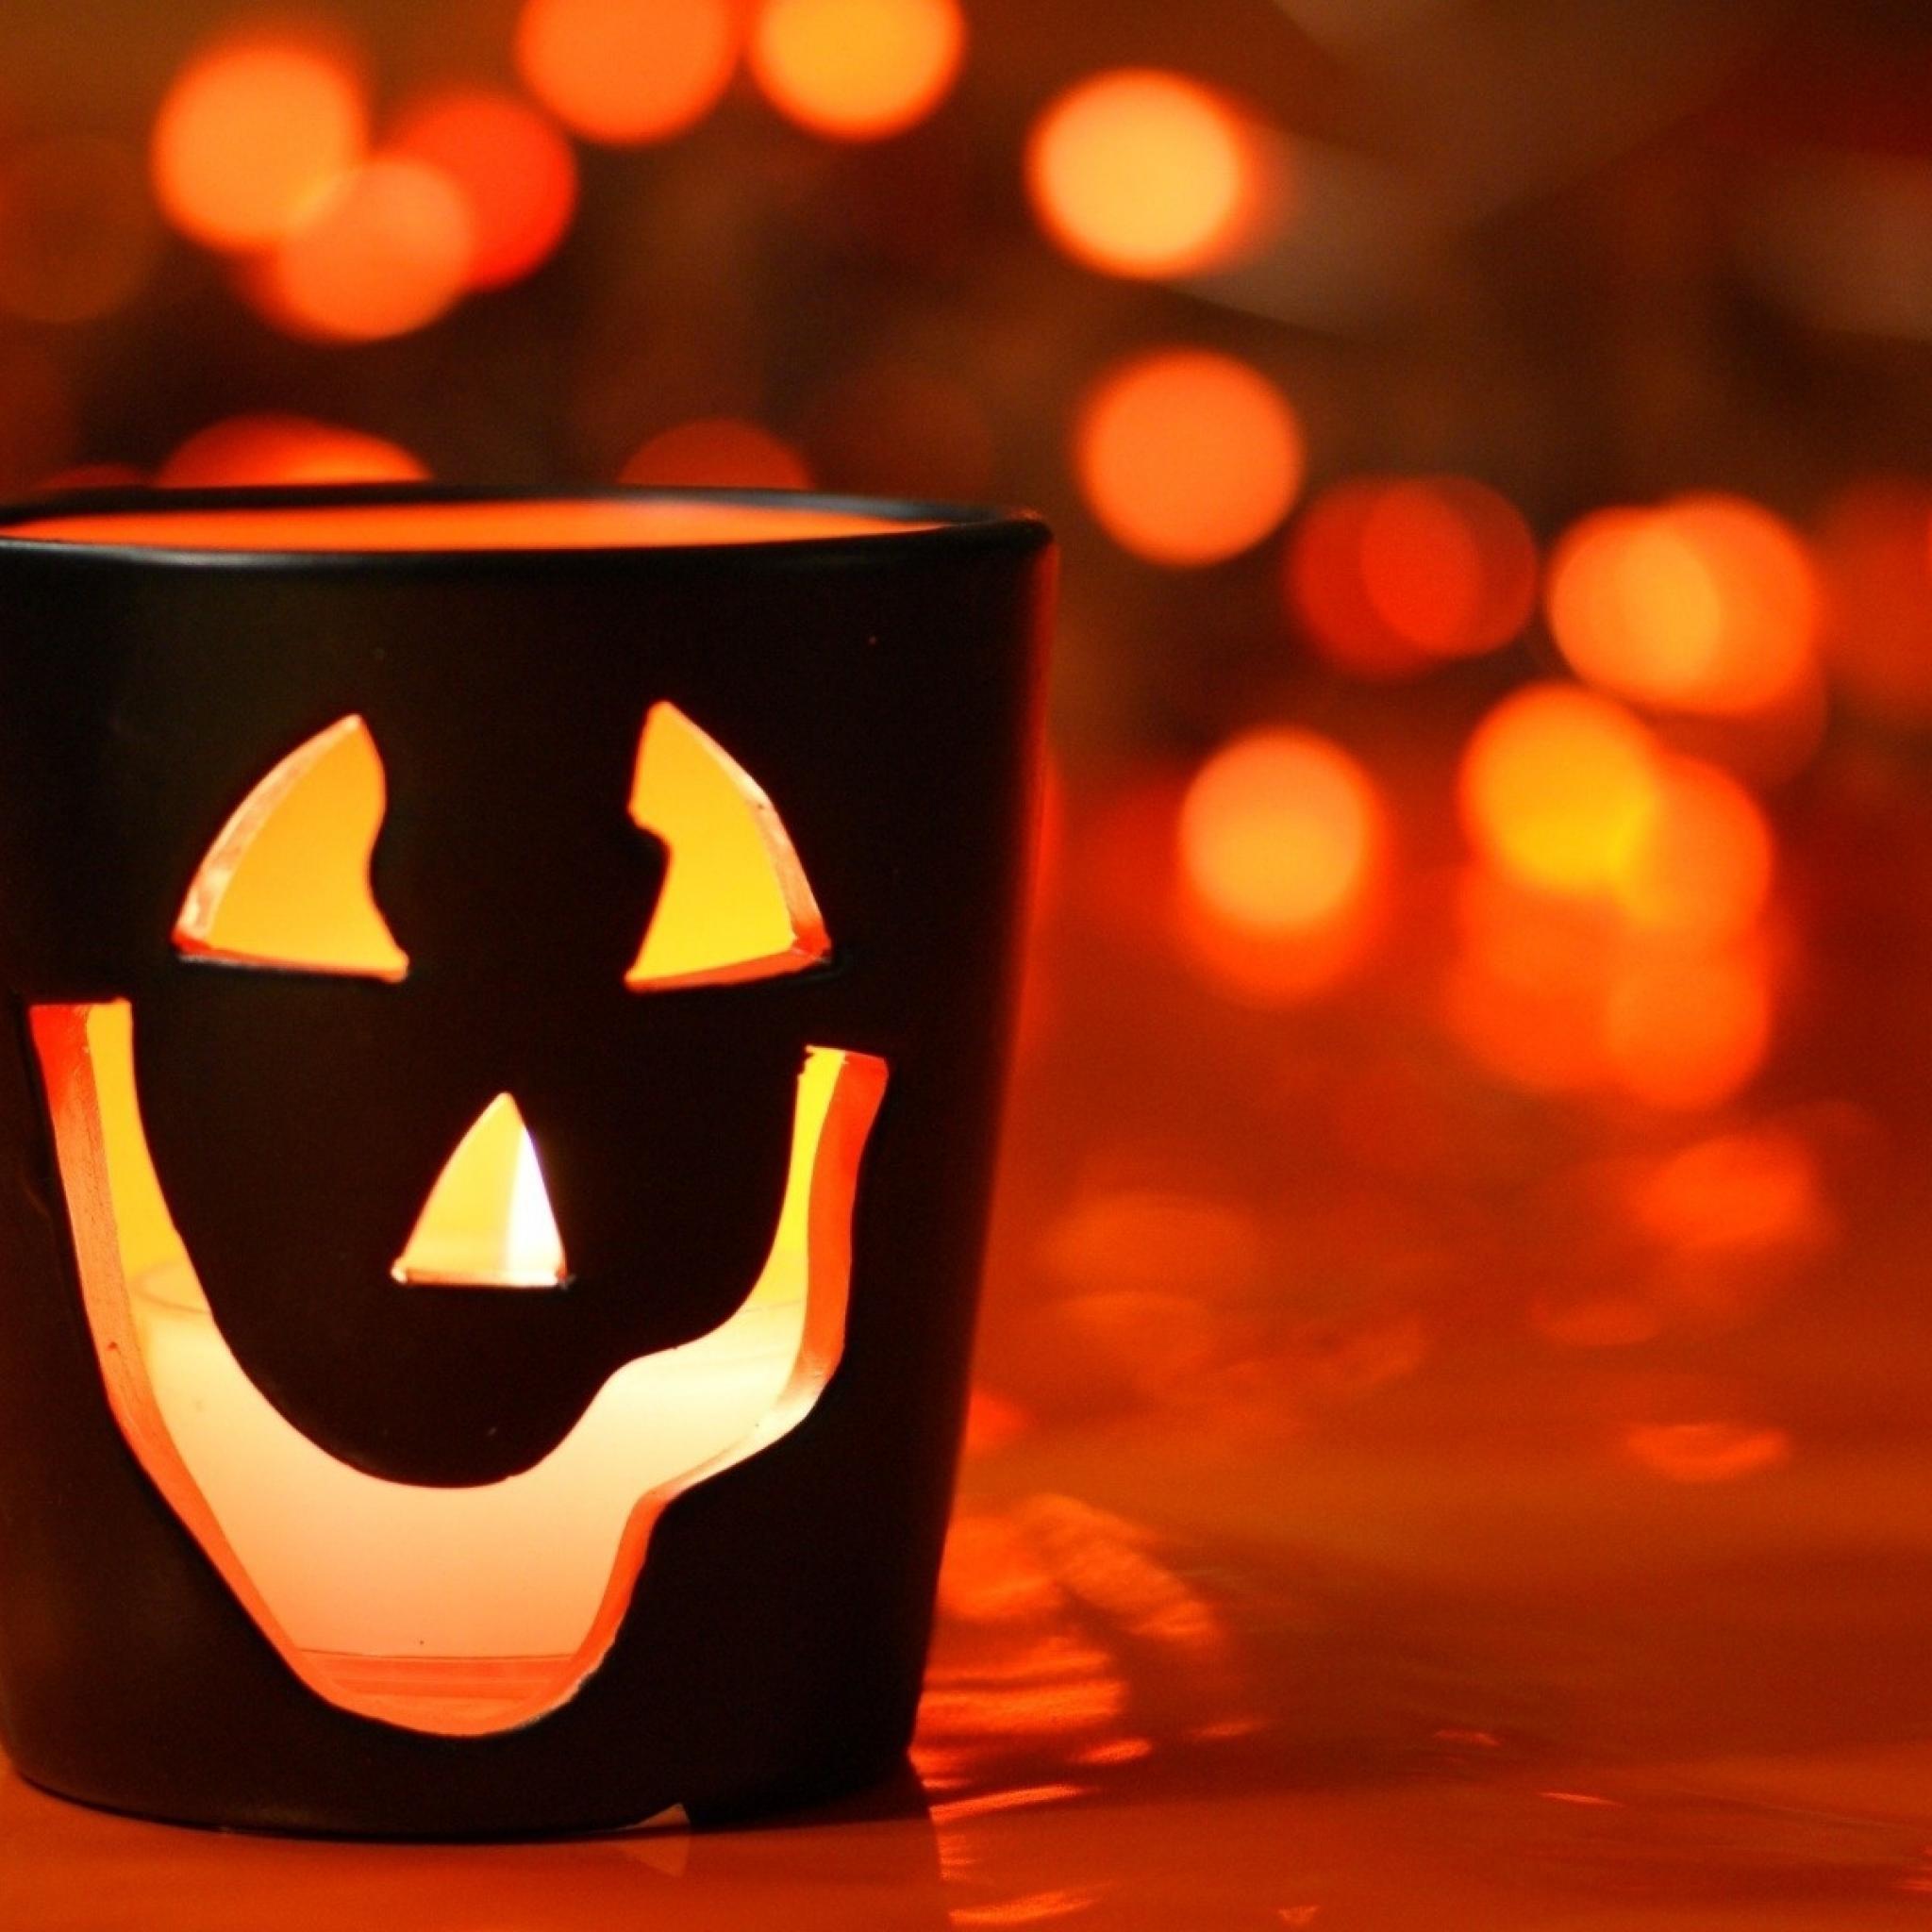 Cute and Happy Halloween Wallpapers HD for Free (39)